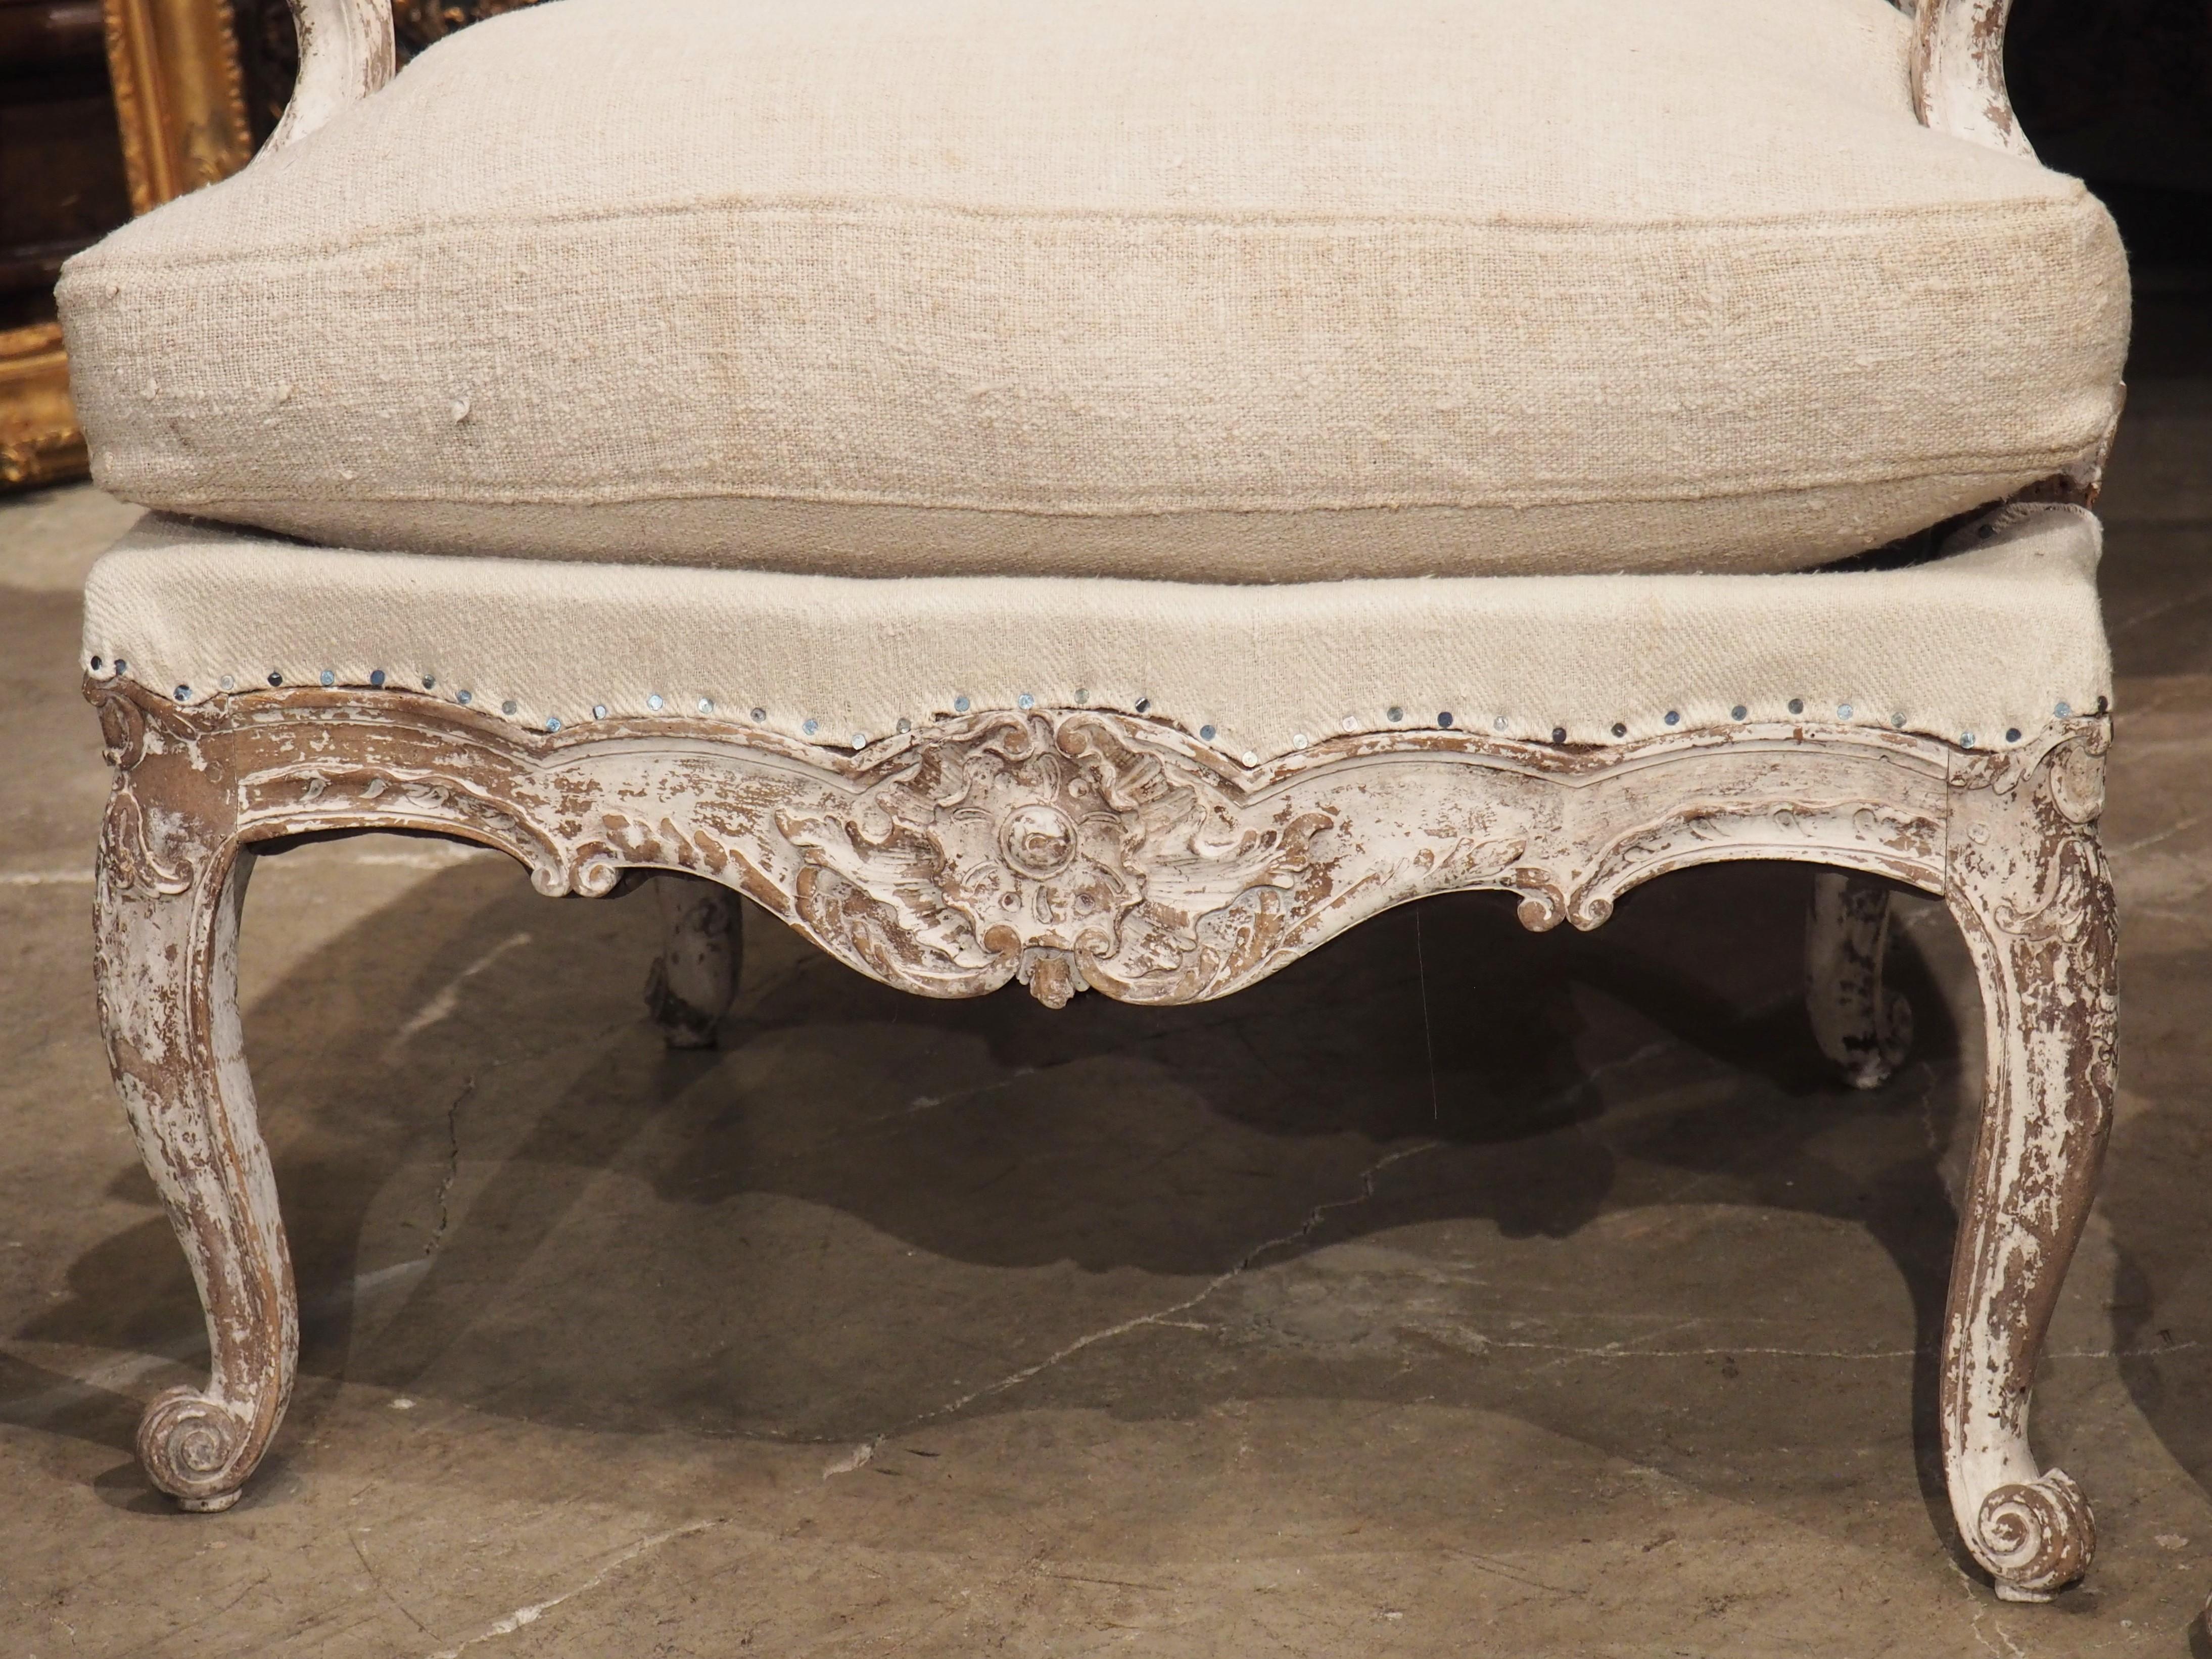 One of the most characteristic decor from the Regence period is the coquille, or scalloped shell. Often appearing as central motifs on consoles, tables, and armoires, our pair of Regence style fauteuil armchairs have a large coquille medallion